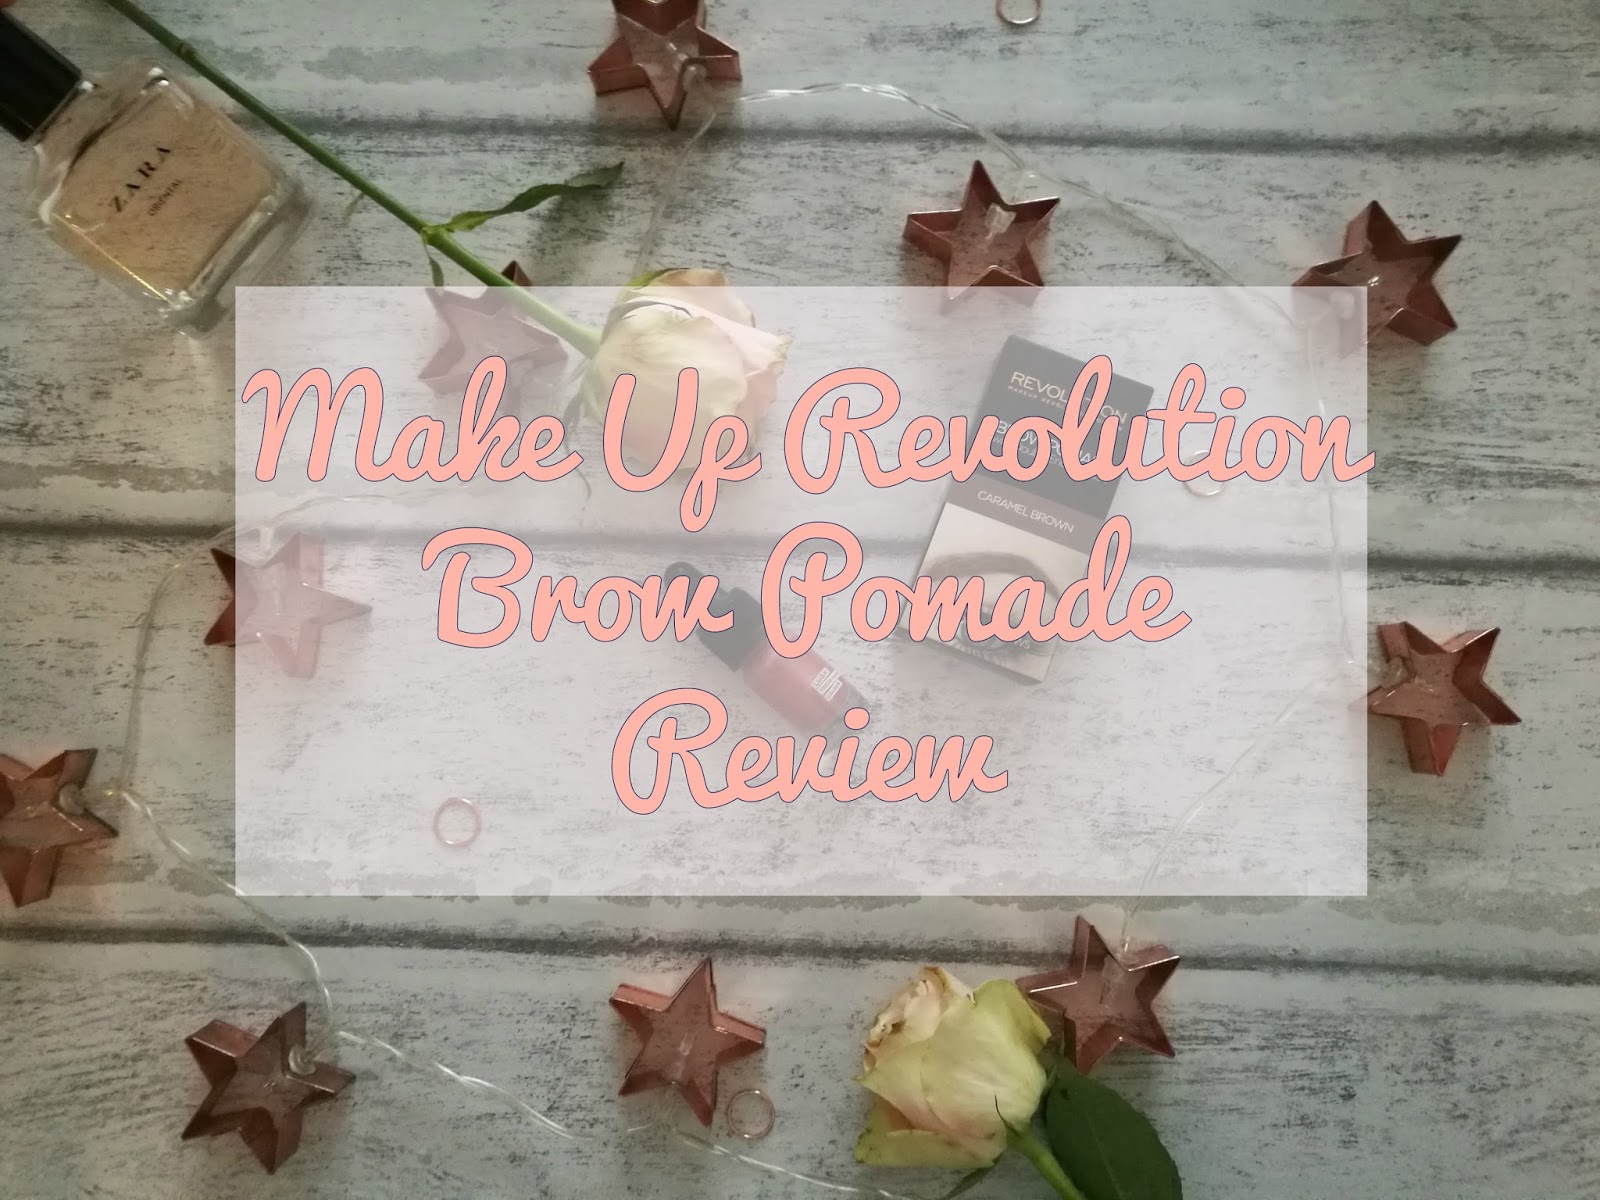 Beauty Review - Make up Revolution Brow Pomade in Caramel Brown